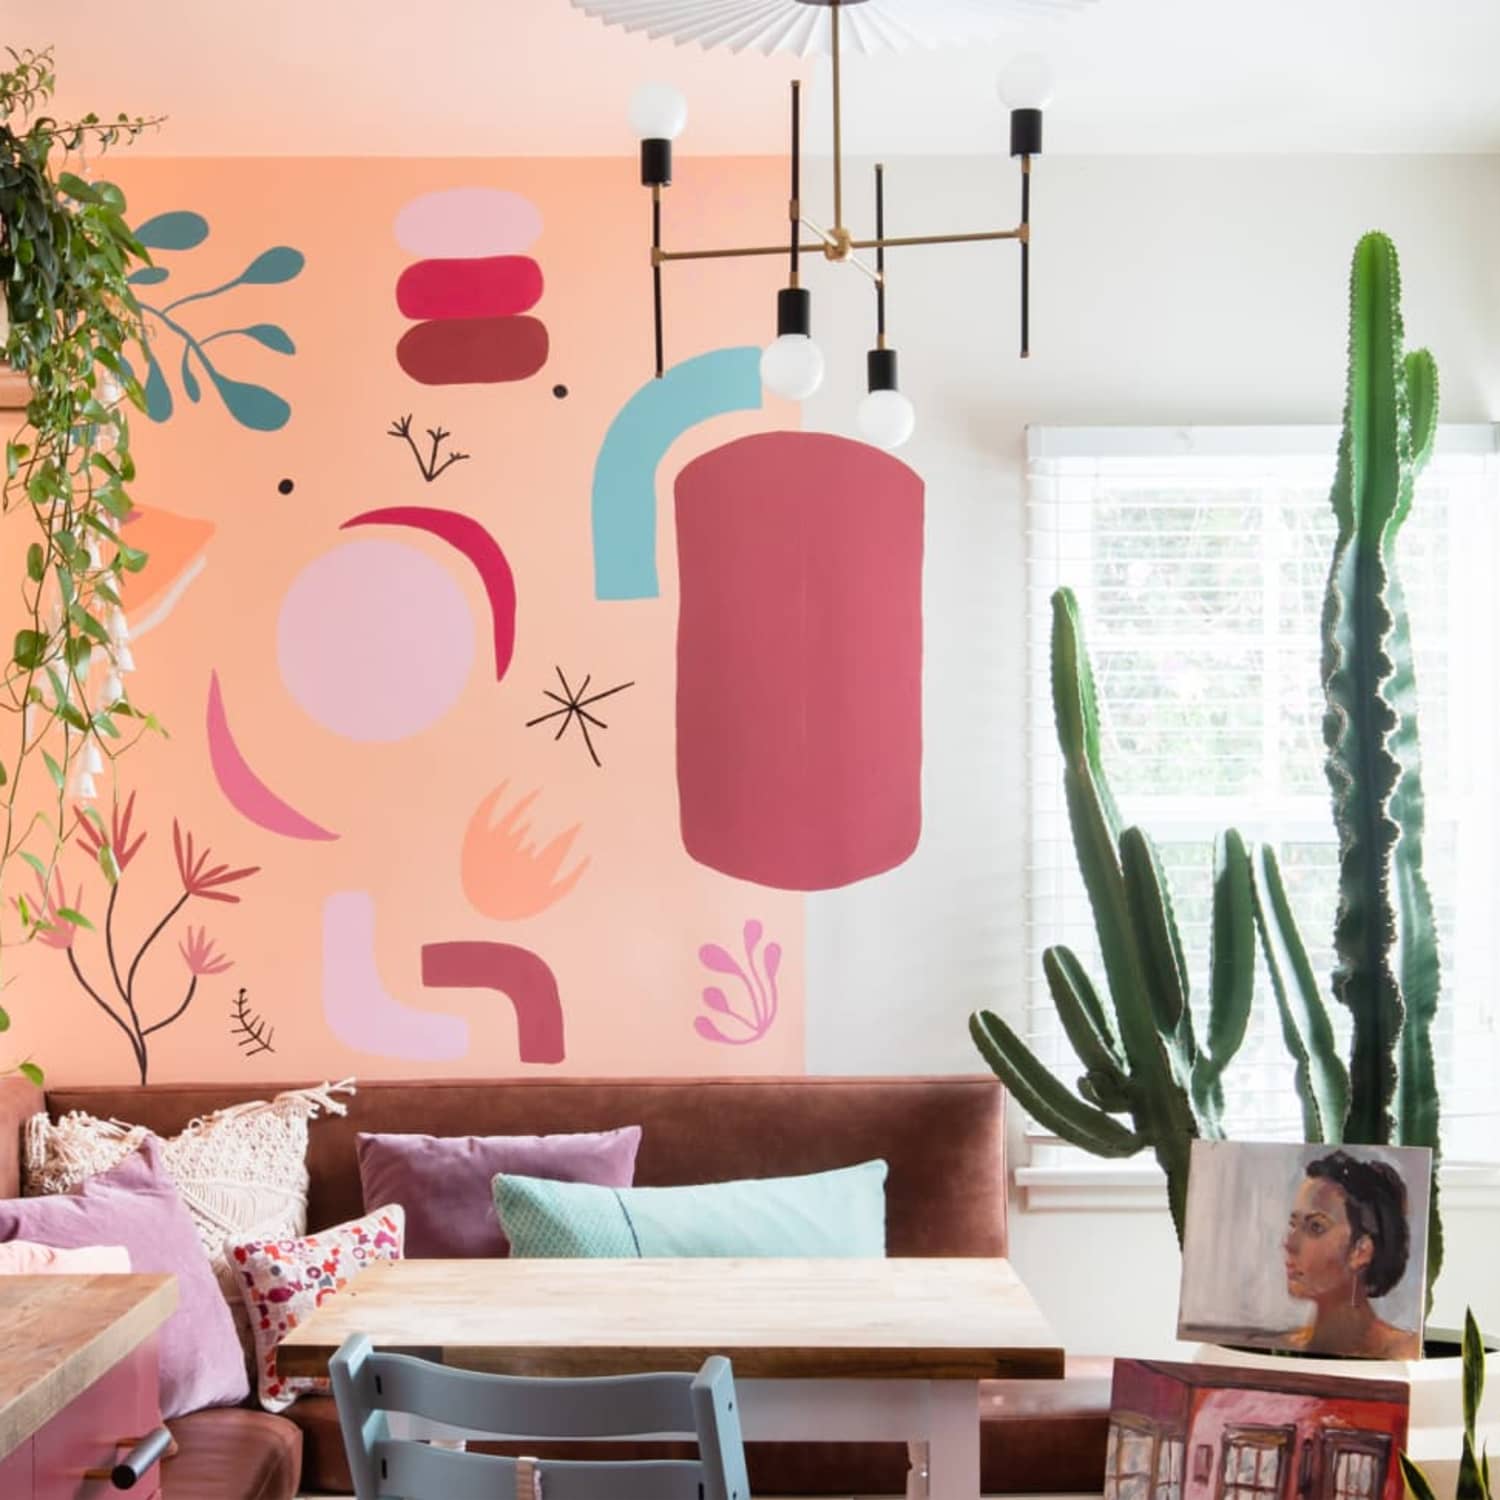 The 20 Best Pink Paint Colors to Upgrade Any Space